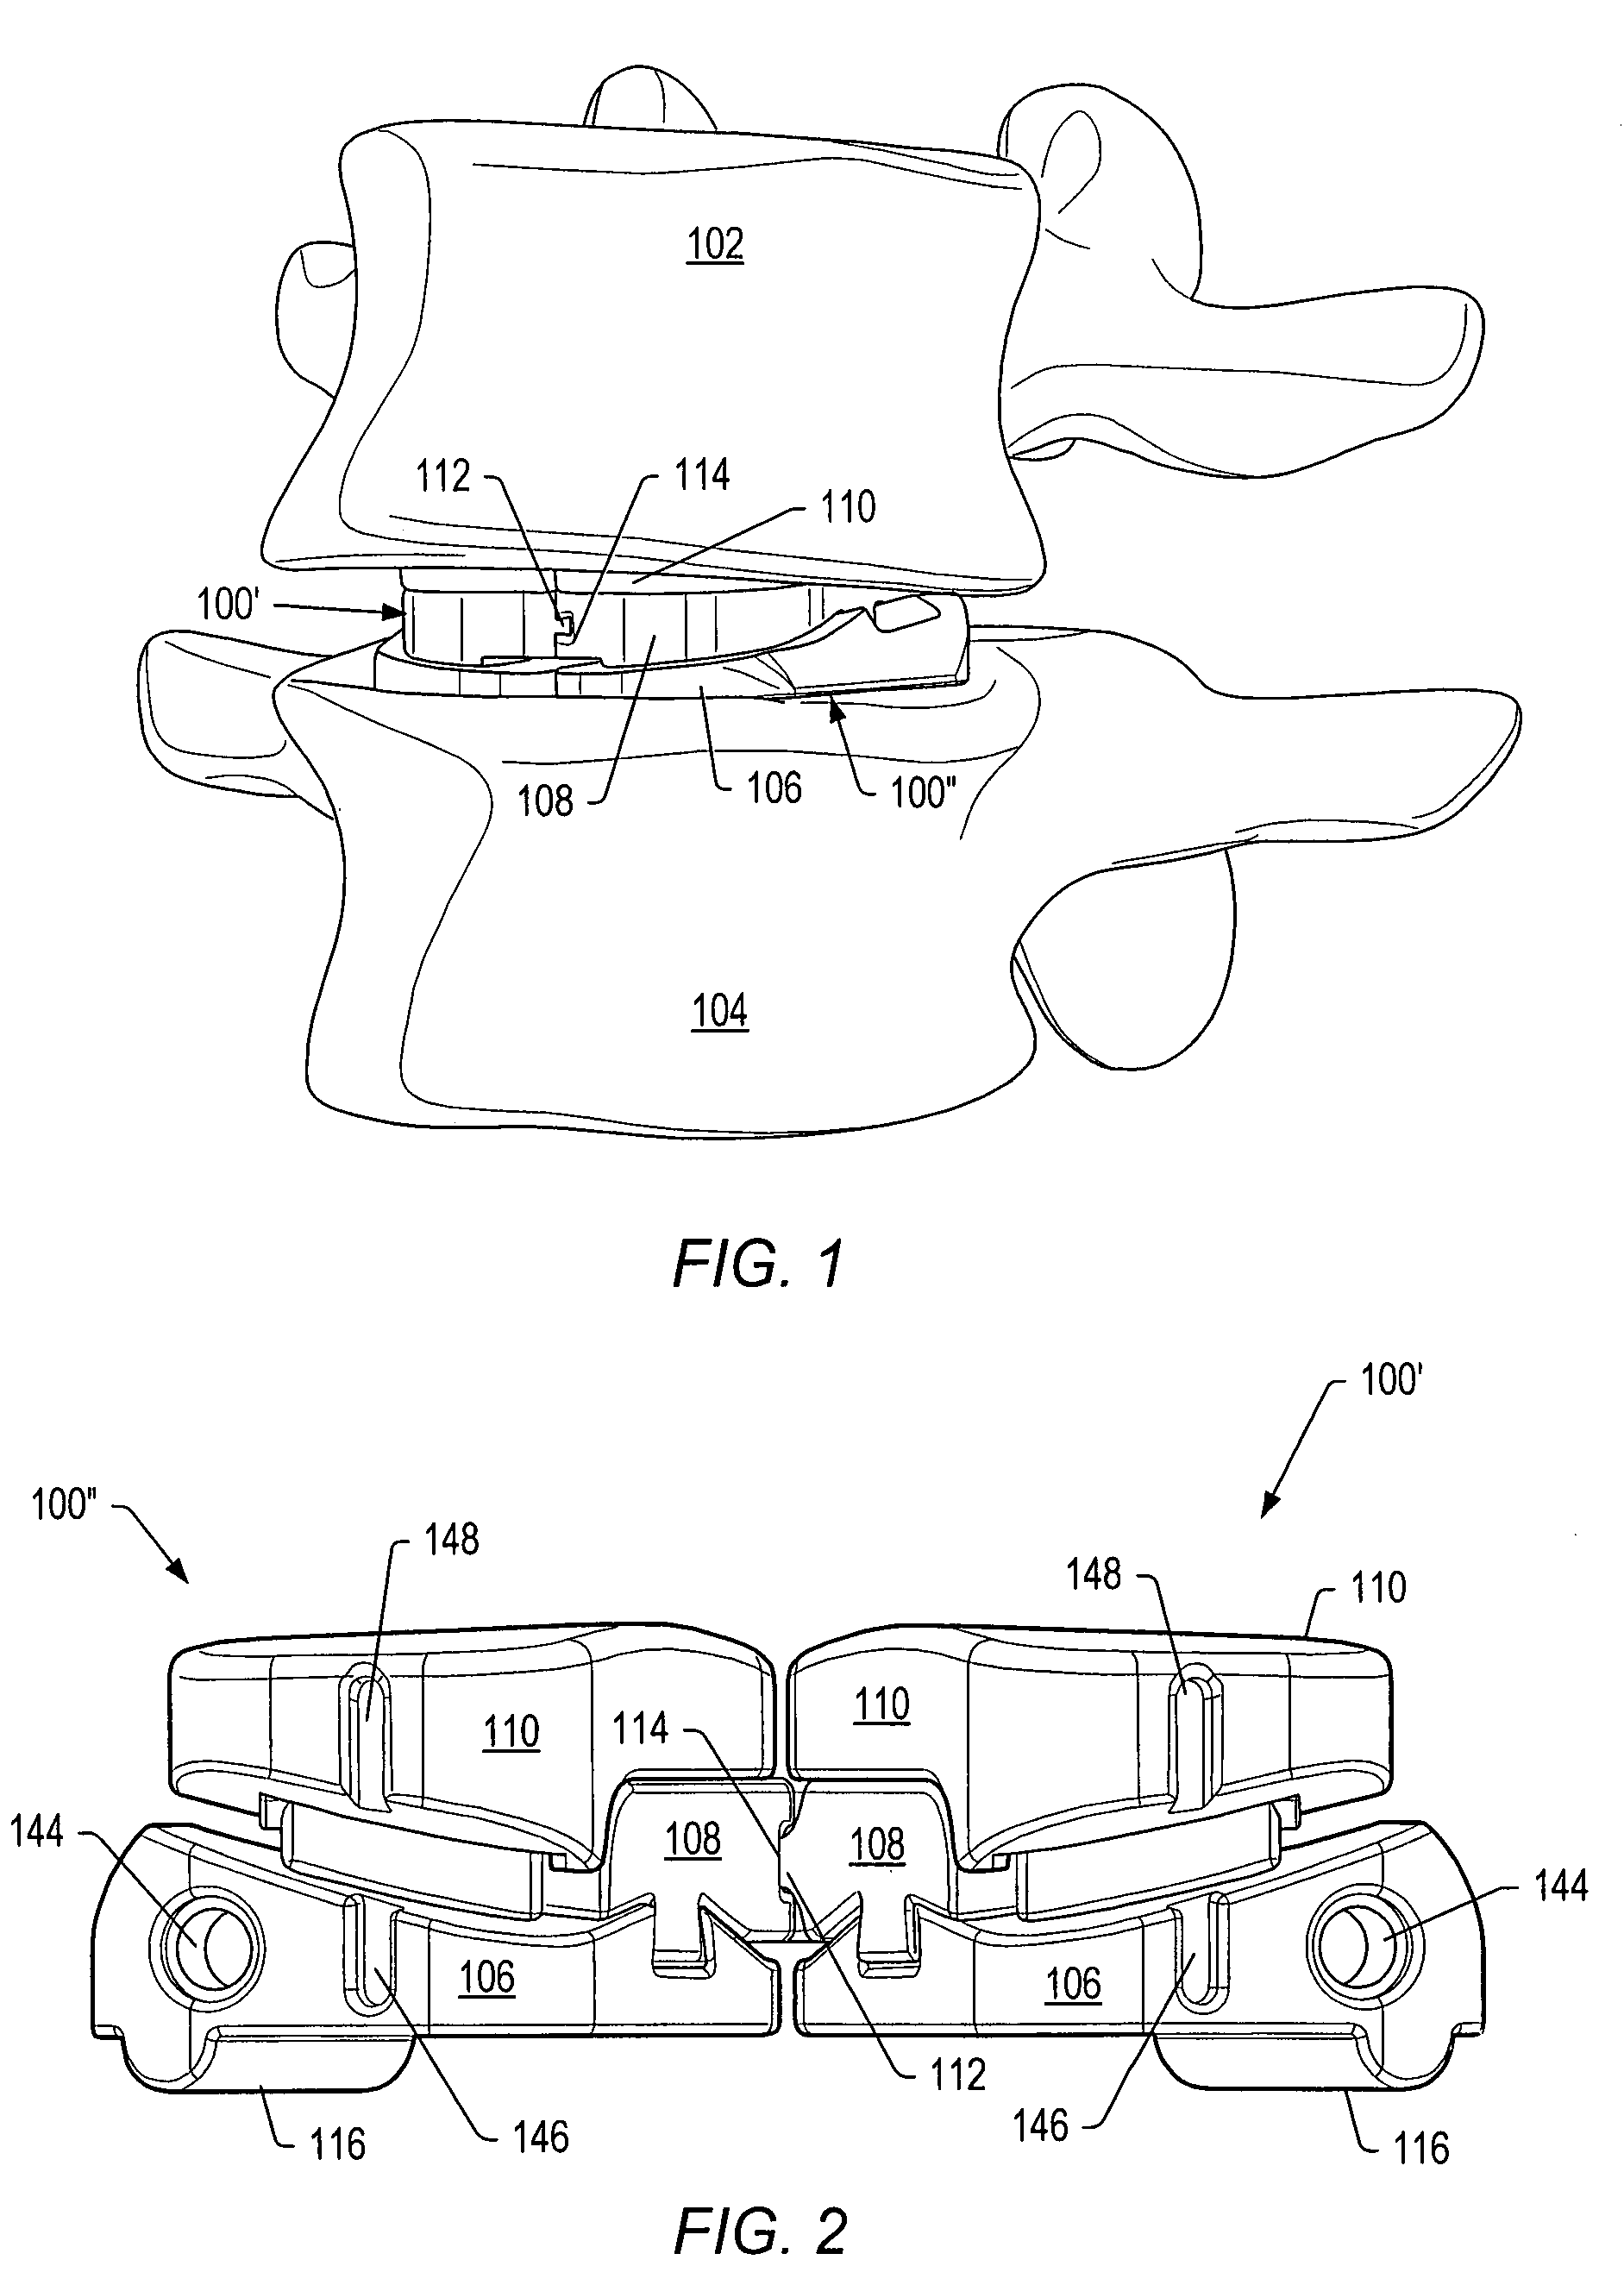 Dampener system for a posterior stabilization system with a fixed length elongated member